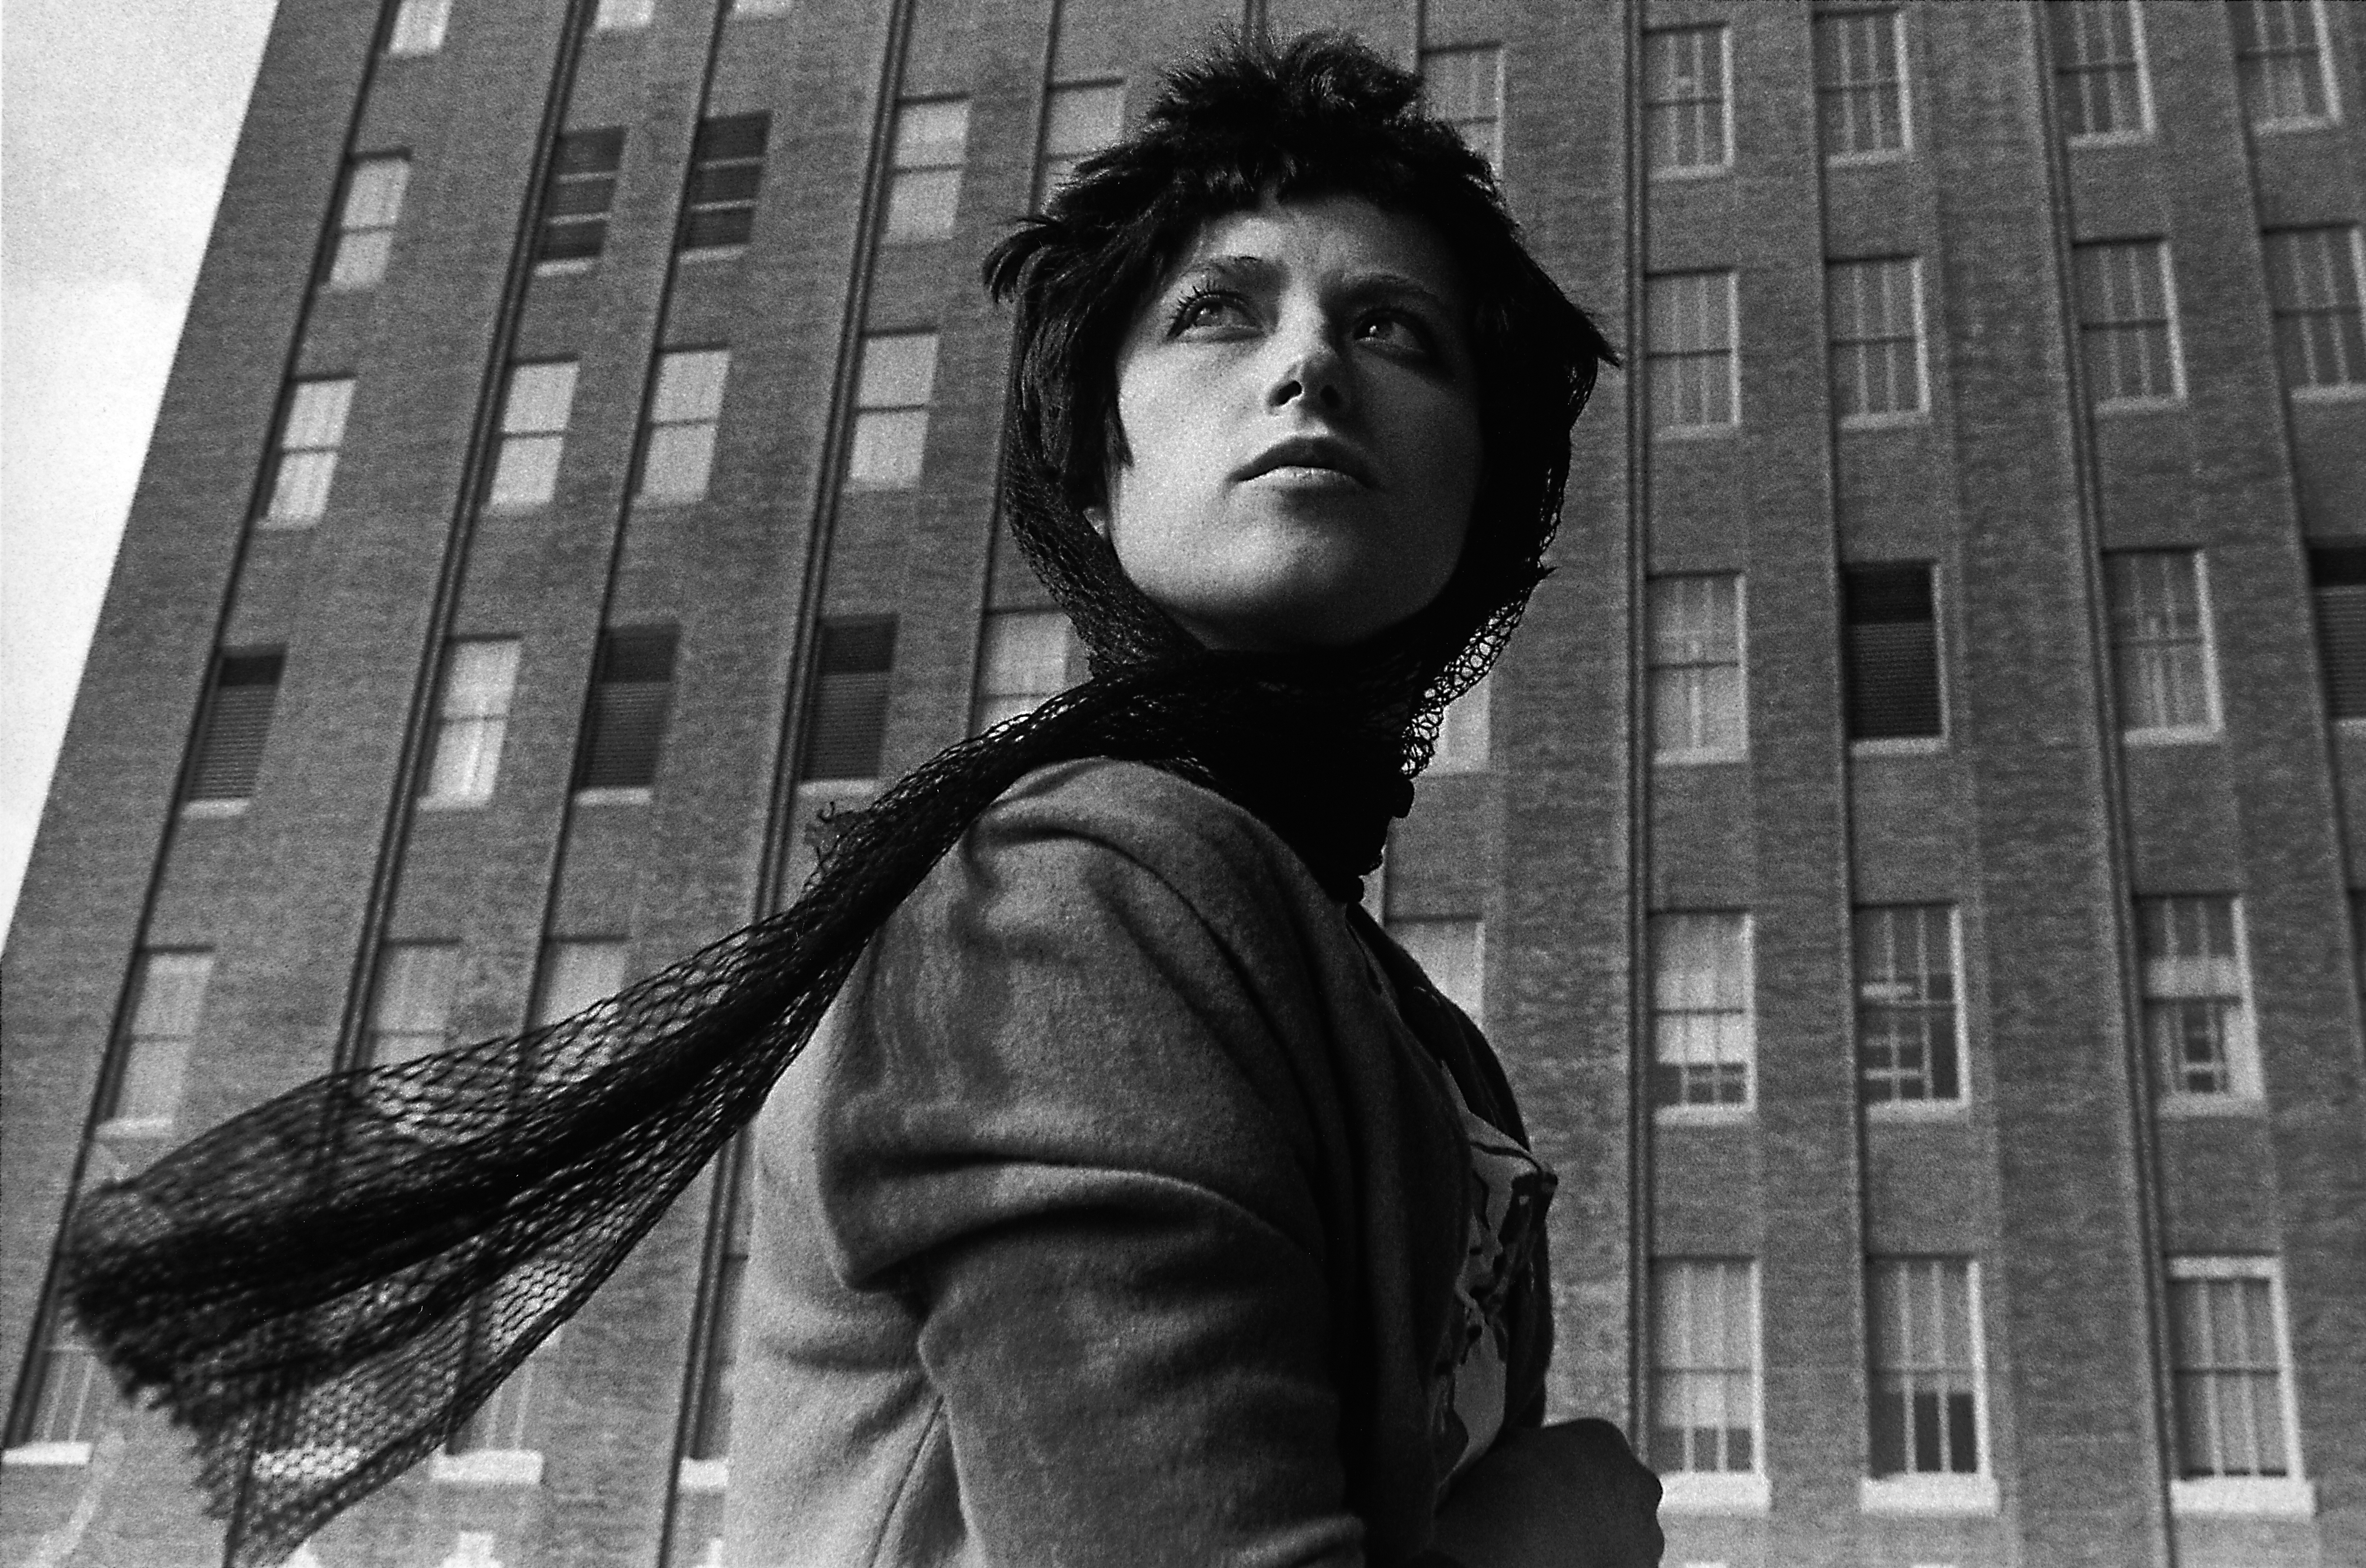 Cindy Sherman  Un Untitled Film Still #58, 1980 Silbergelatineabzug 26 5/8 x 39 5/8 in. | 67,5 x 100,5 cm KUNSTMUSEUM WOLFSBURG Courtesy of the artist and Metro Pictures, New York